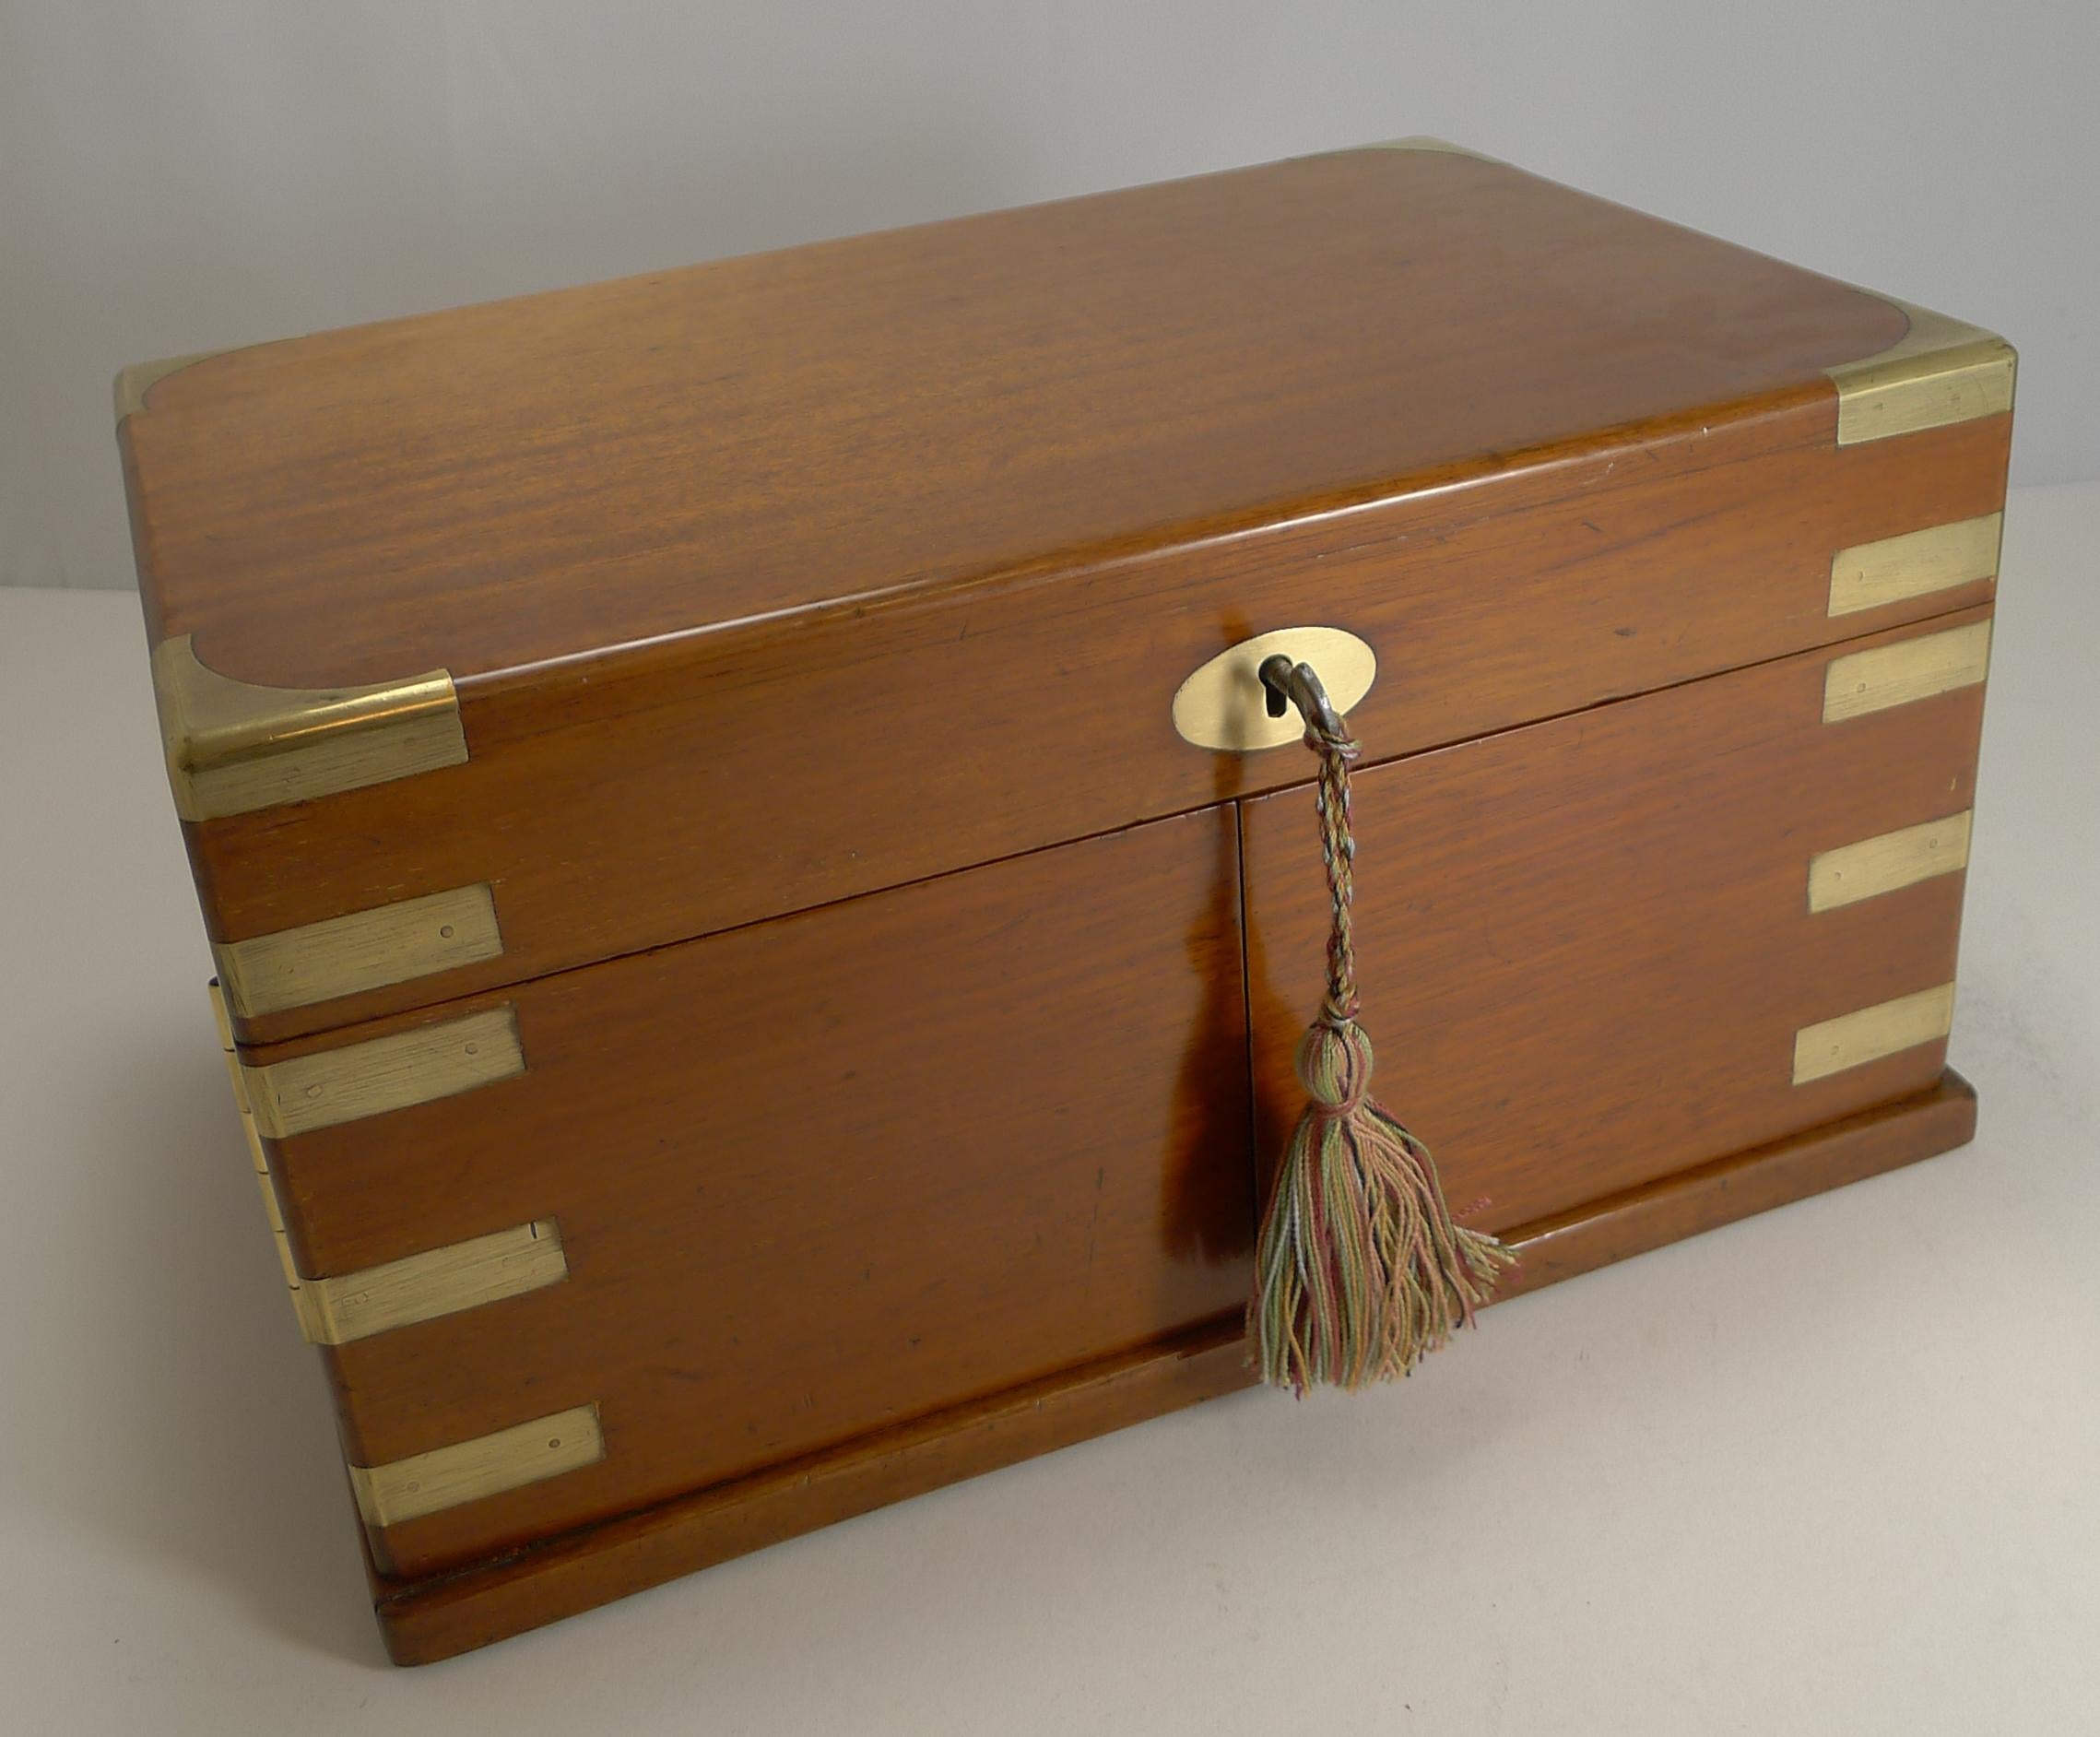 A striking and unusual late Victorian English games box made from mahogany with military or campaign style brass inlay; these box are usually plain, this one being a little more special than the rest.

The lid lifts to reveal the folded leather